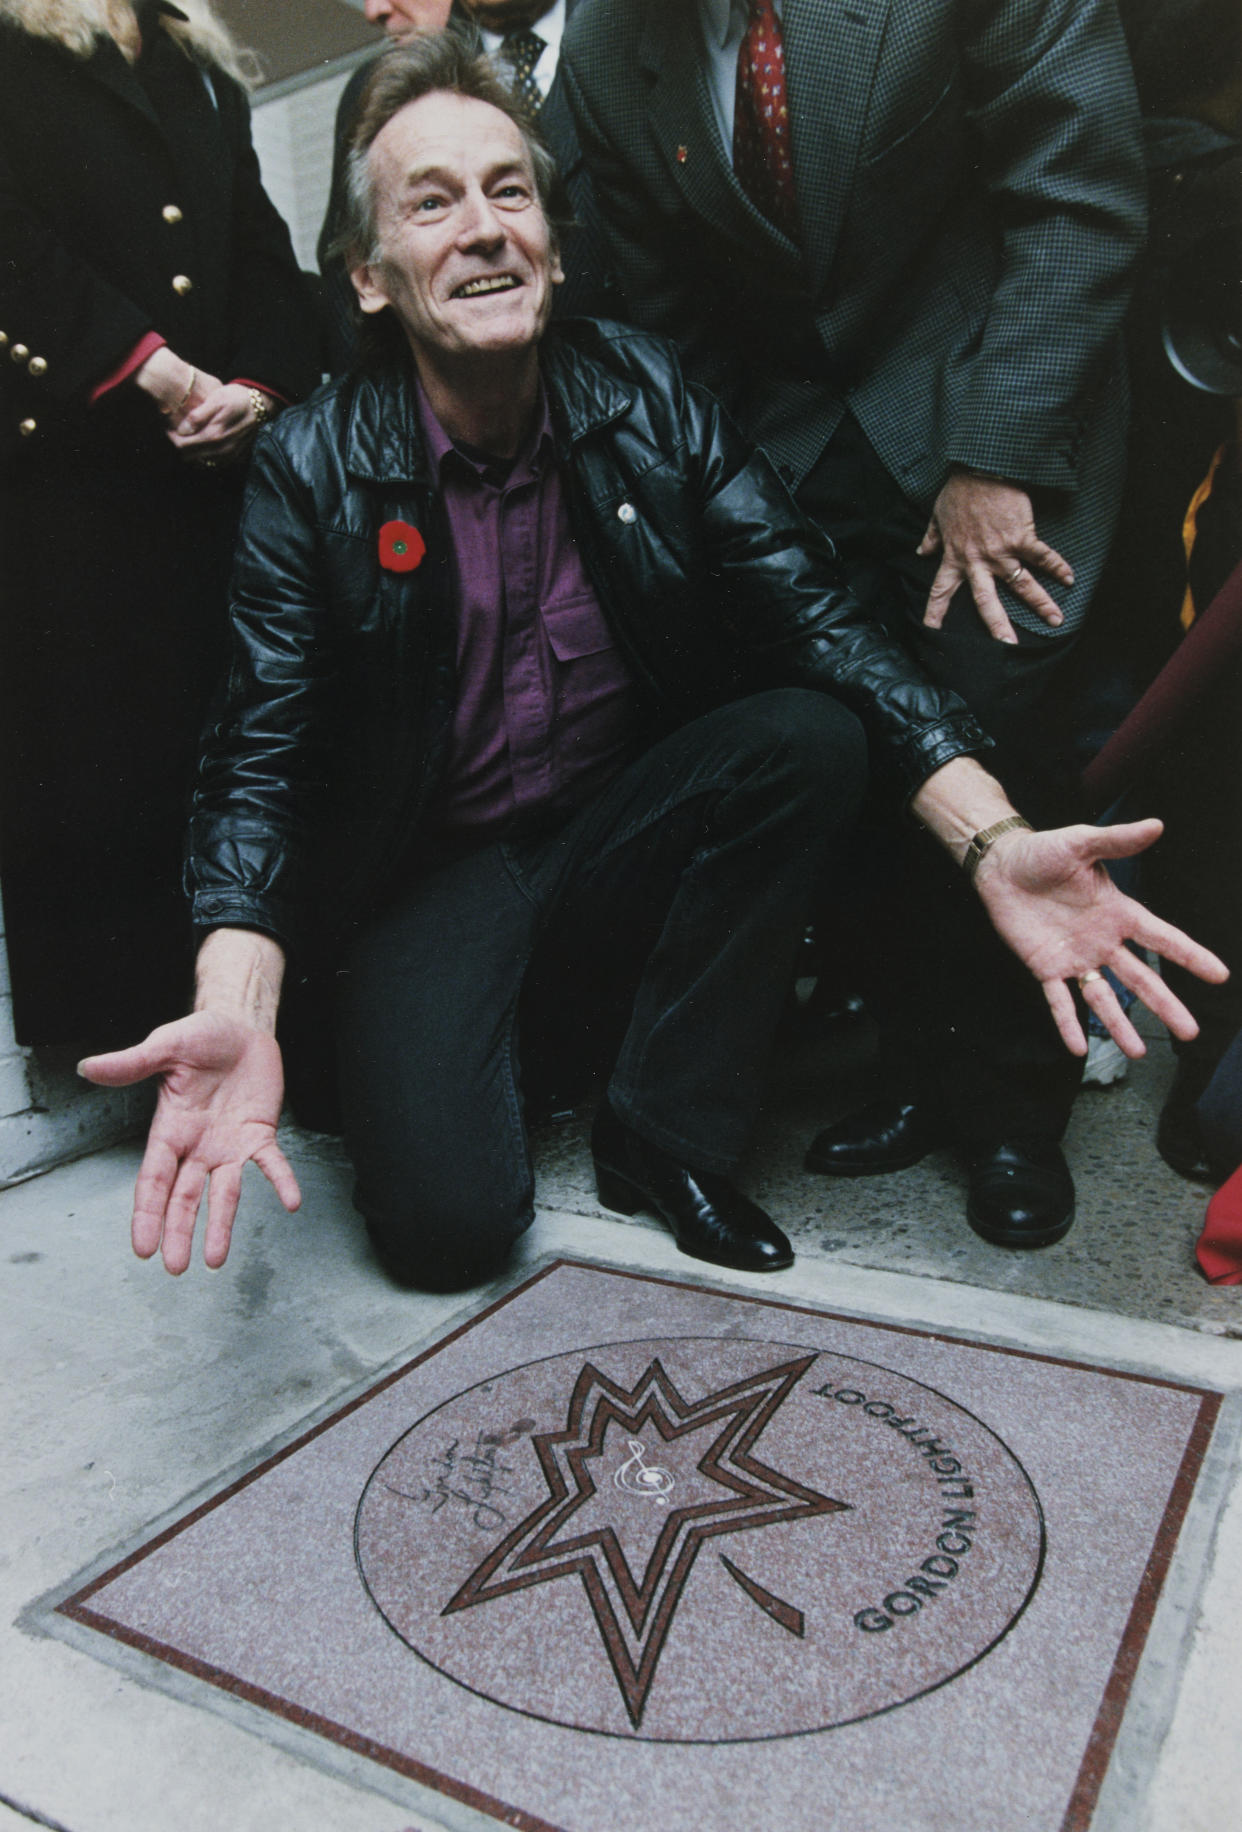 Canadian music legend Gordon Lightfoot celebrates the unveiling of his star on Canada's Walk of Fame in Toronto on Nov. 12, 1998. Lightfoot, whose hits including “Early Morning Rain,” and “The Wreck of the Edmund Fitzgerald," told a tale of Canadian identity that was exported worldwide, died on Monday, May 1, 2023, at a Toronto hospital, according to a family representative. He was 84. (Kevin Frayer/The Canadian Press via AP)